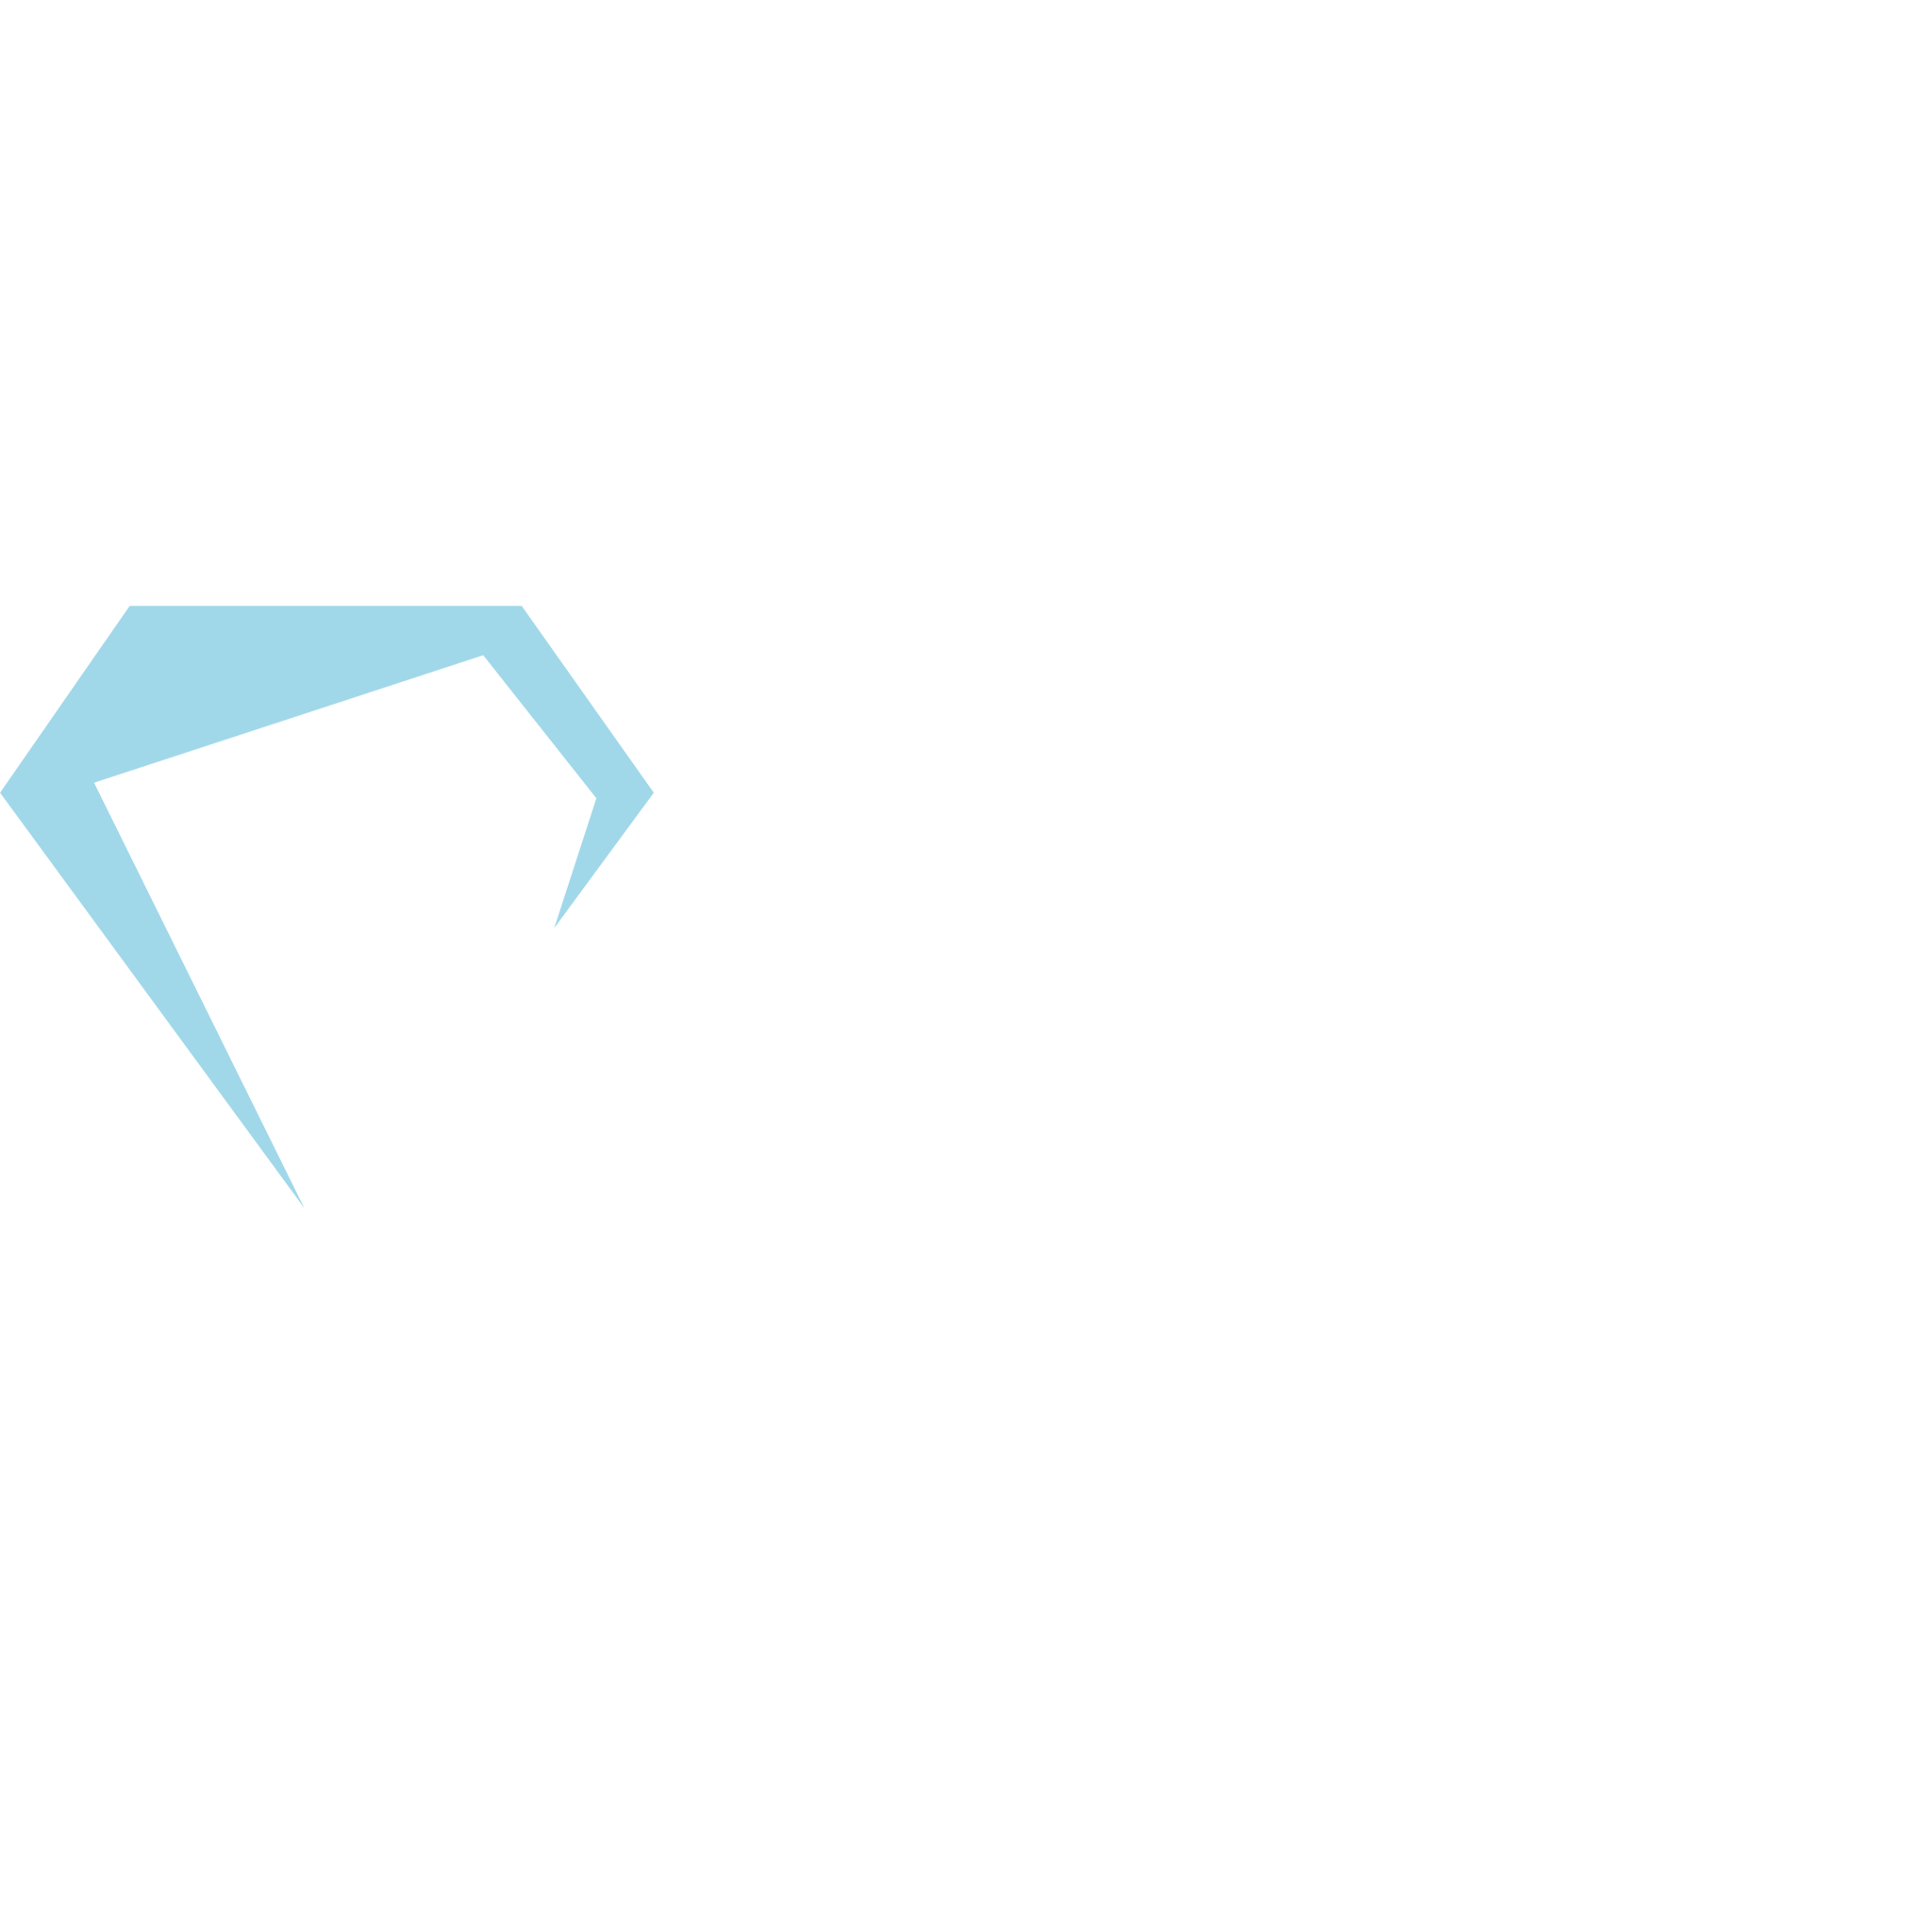 Paragon Security Solutions